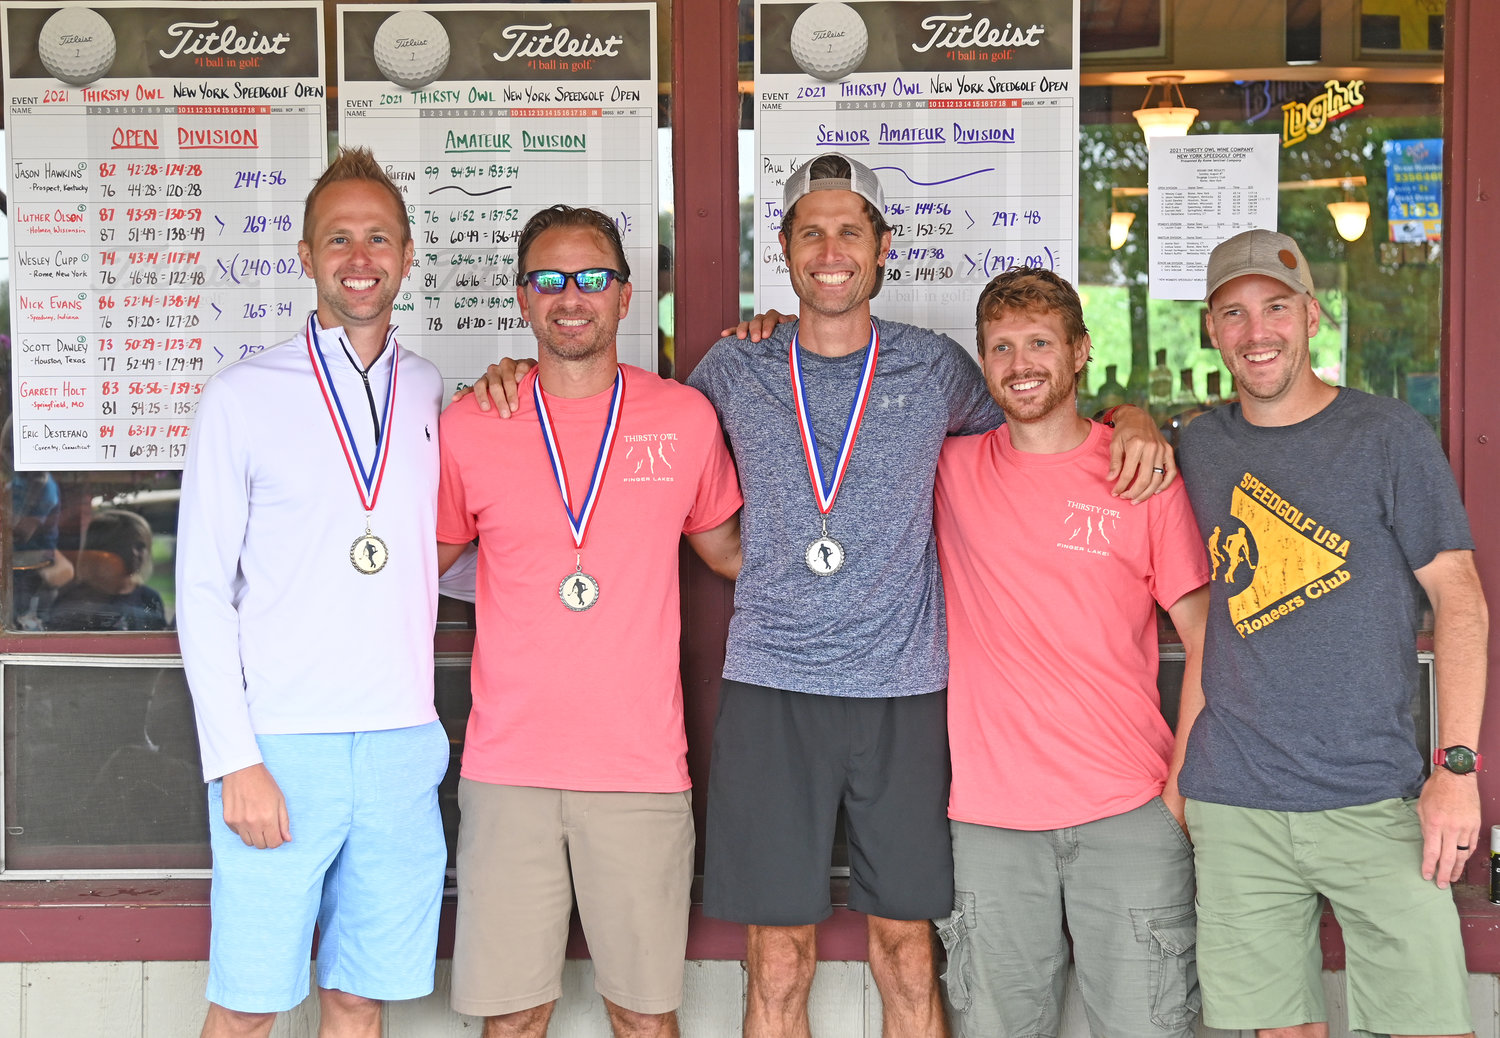 OPEN DIVISION TOP 5 —The top five of the Open Division pose for a photo after the Thirsty Owl New York Speedgolf Open at Rome Country Club. From left are Wes Cupp, winner; Scott Dawley, third place; Jason Hawkins, second place; Nick Evans, fourth place and Luther Olson, fifth place.